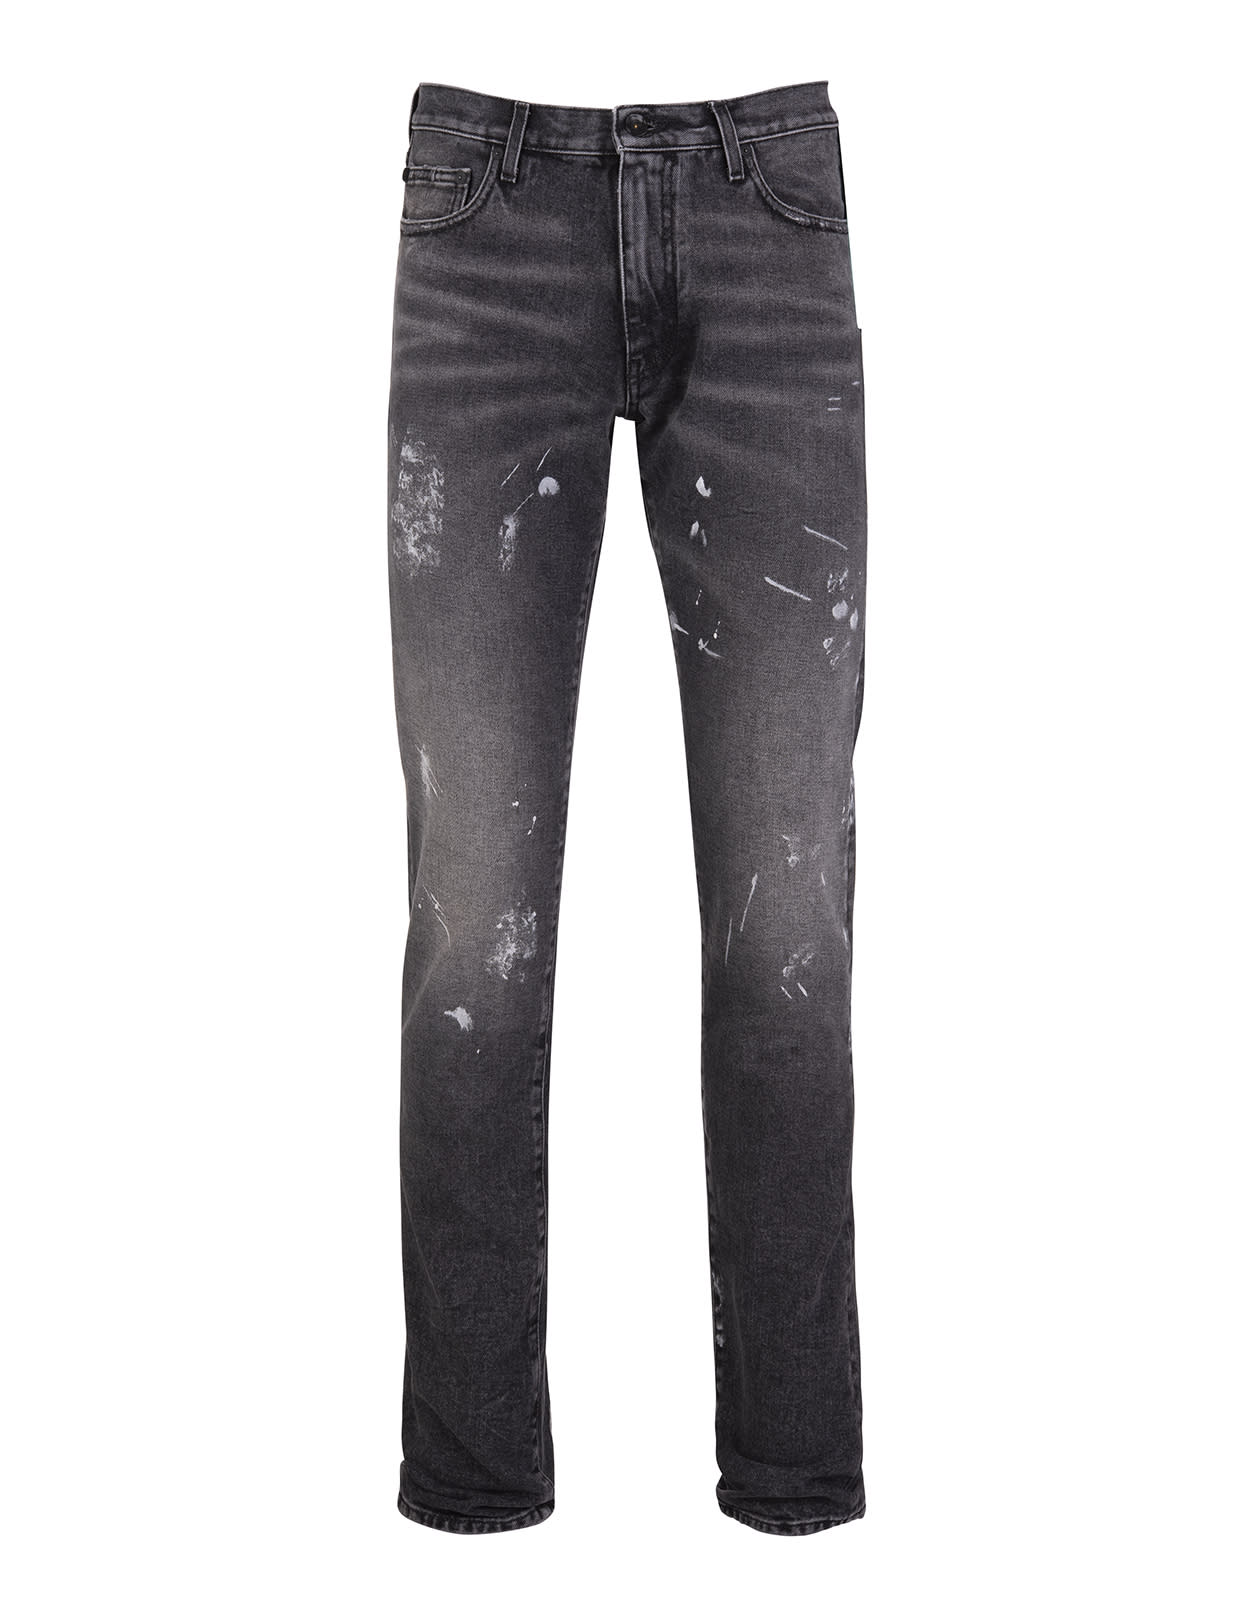 Off-White Man Diag Outline Paint Skinny Jeans